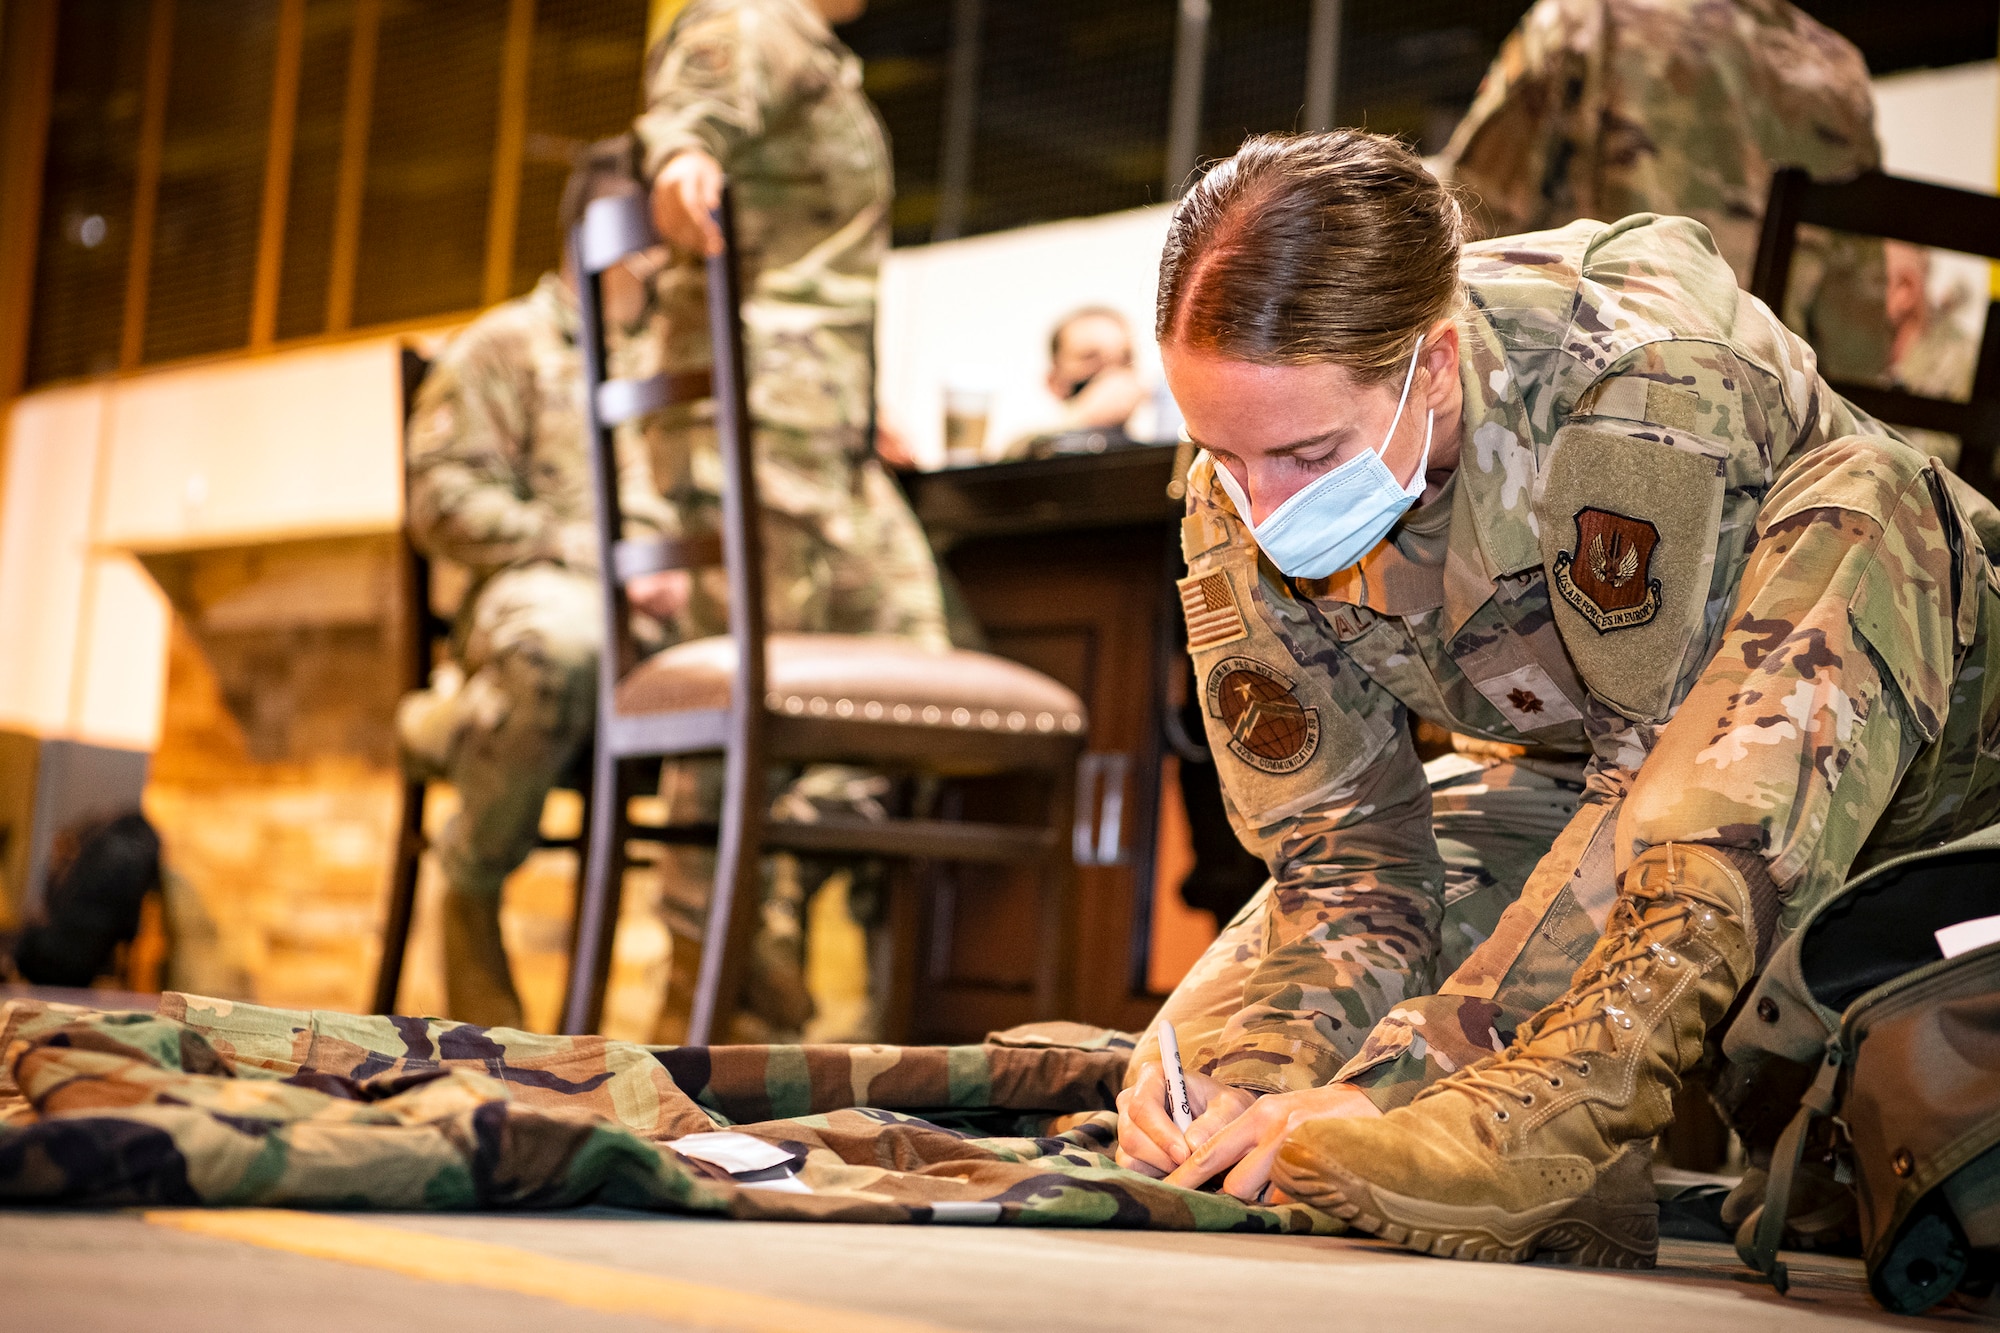 U.S. Air Force Maj. Erica Balfour, 423d Communications Squadron commander, writes on her Mission Oriented Protective Posture gear prior to Ability to Survive and Operate training at RAF Alconbury, England, Aug. 27, 2021. The ATSO rodeo was designed to reinforce Airmen’s ability to properly utilize their MOPP gear in a potential chemical environment. (U.S. Air Force photo by Senior Airman Eugene Oliver)